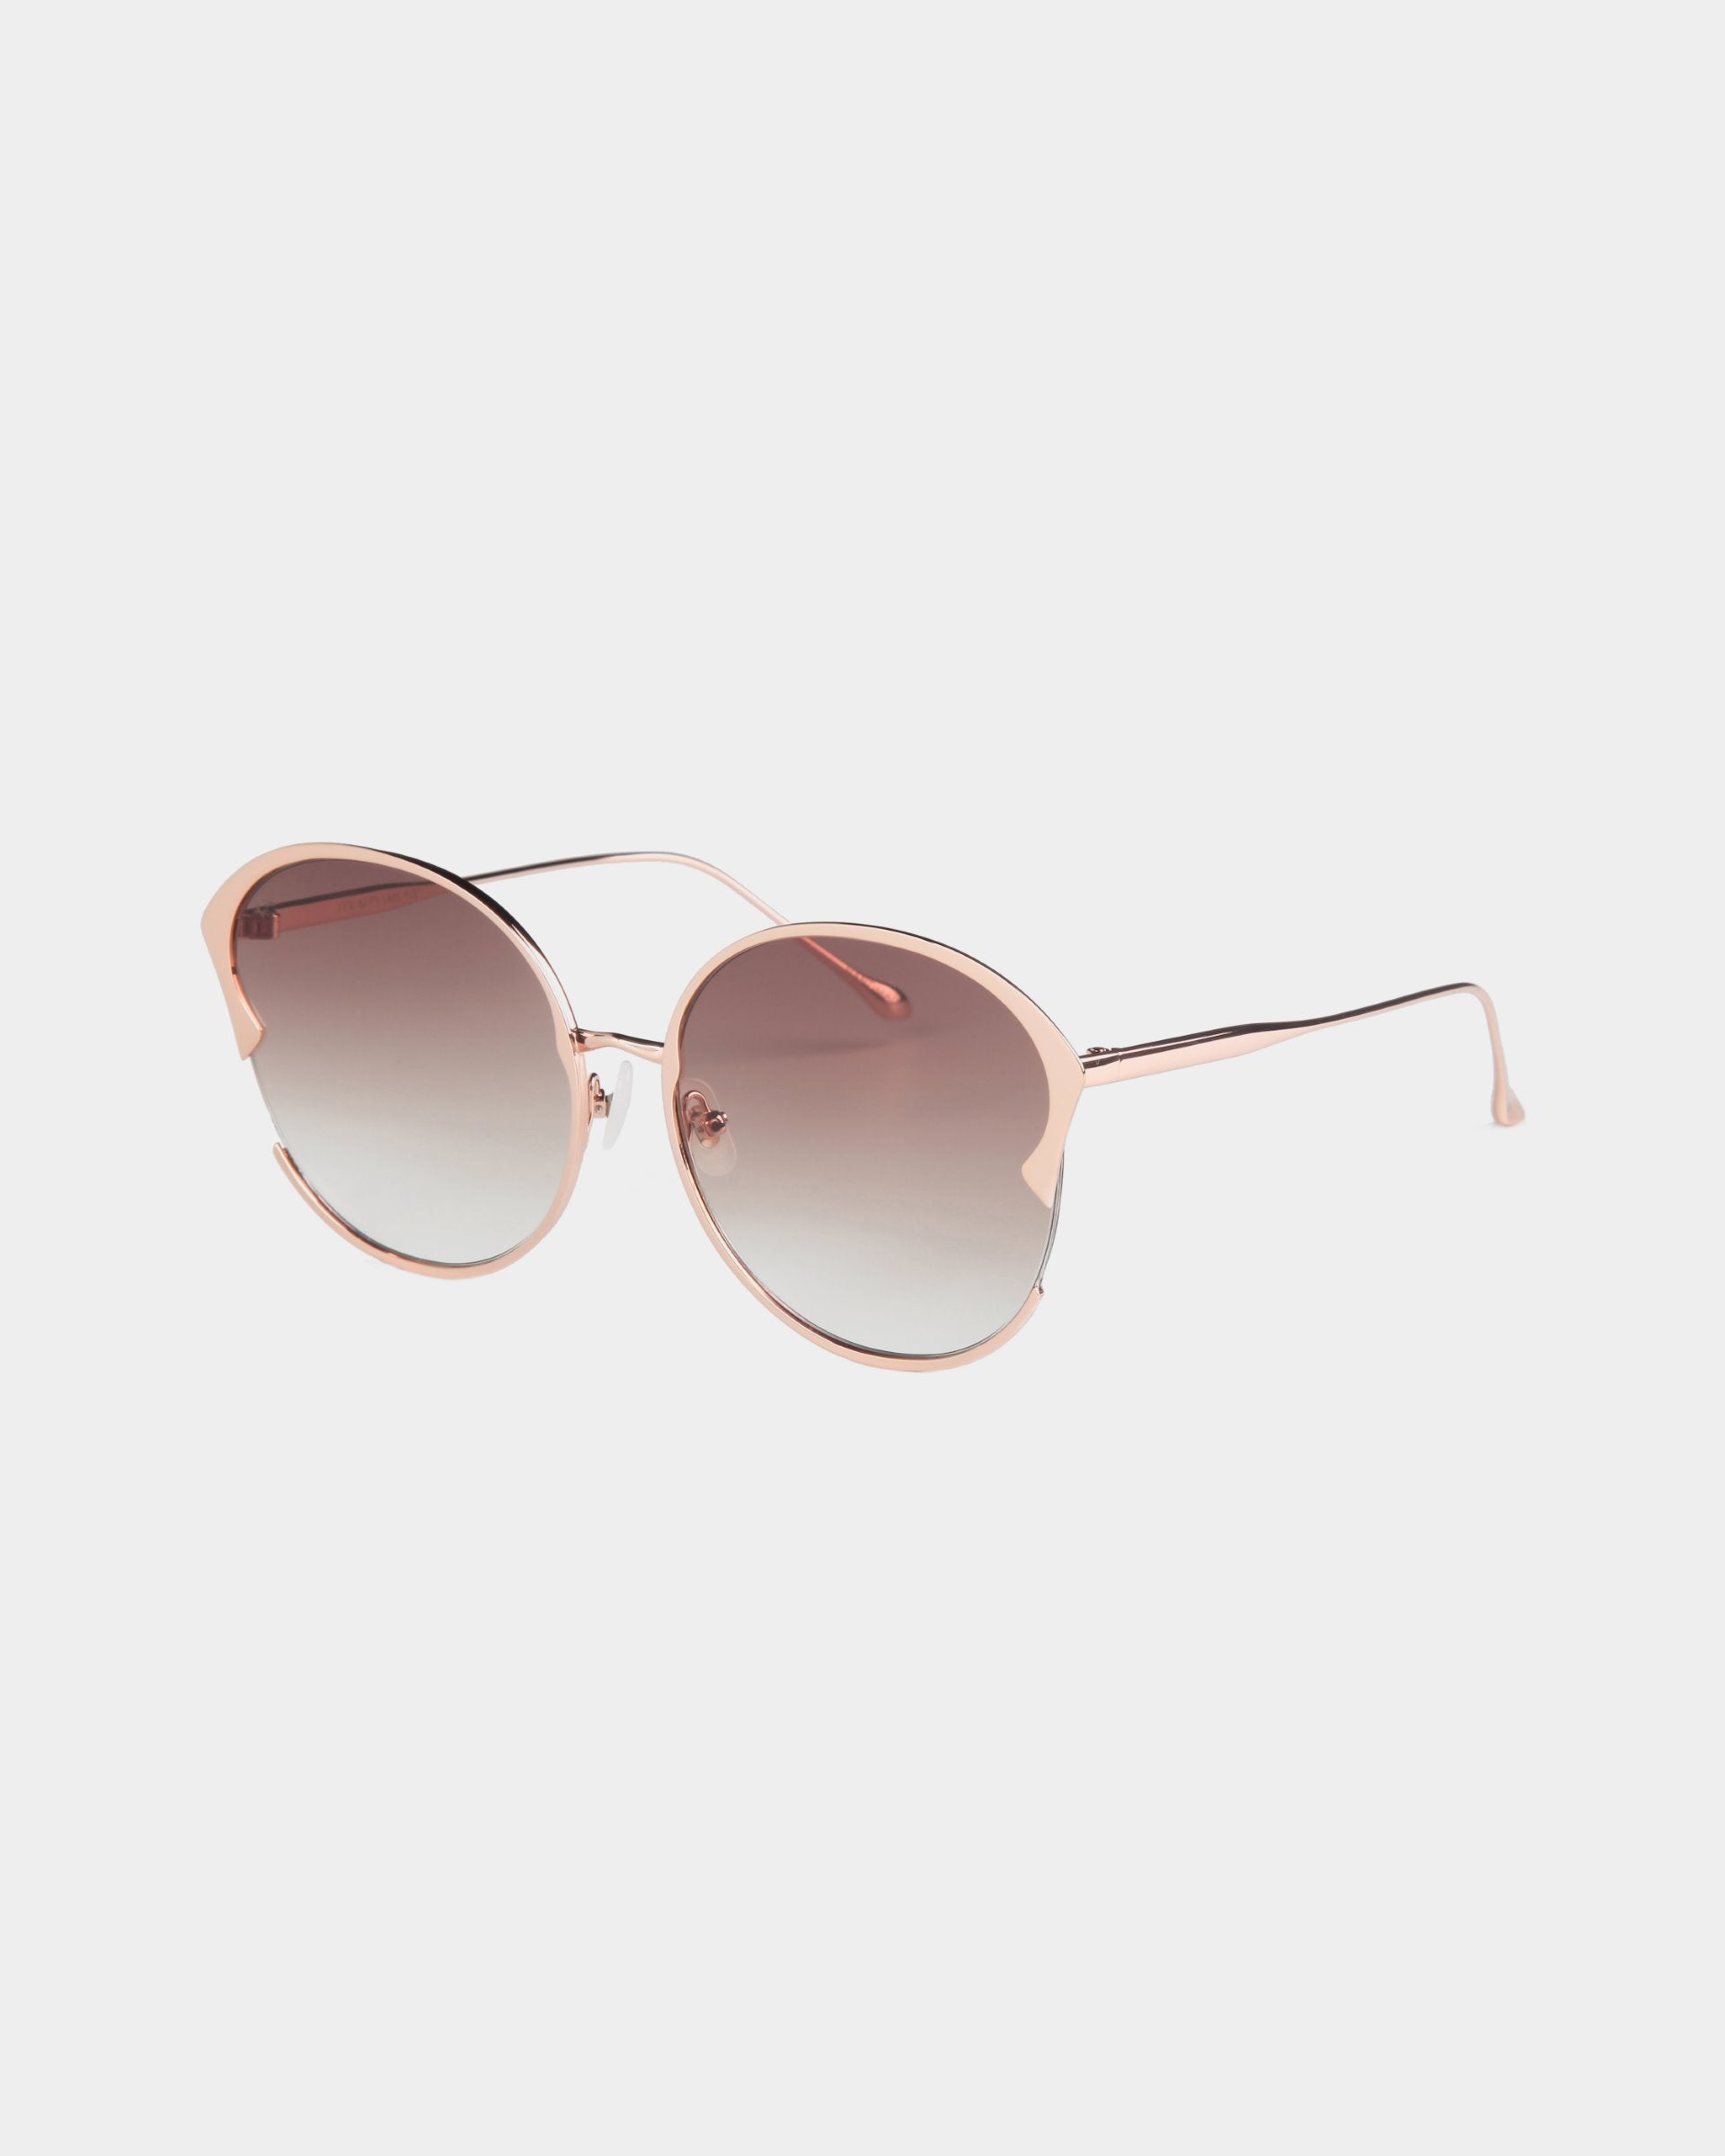 A pair of stylish **For Art's Sake® Alectrona** sunglasses with an 18-karat gold-plated light pink metallic frame and gradient, shatter-resistant lenses. The lenses are darker at the top and gradually lighten towards the bottom. The design is modern with a slight cat-eye shape, thin curved temples, and adjustable jade nose pads.